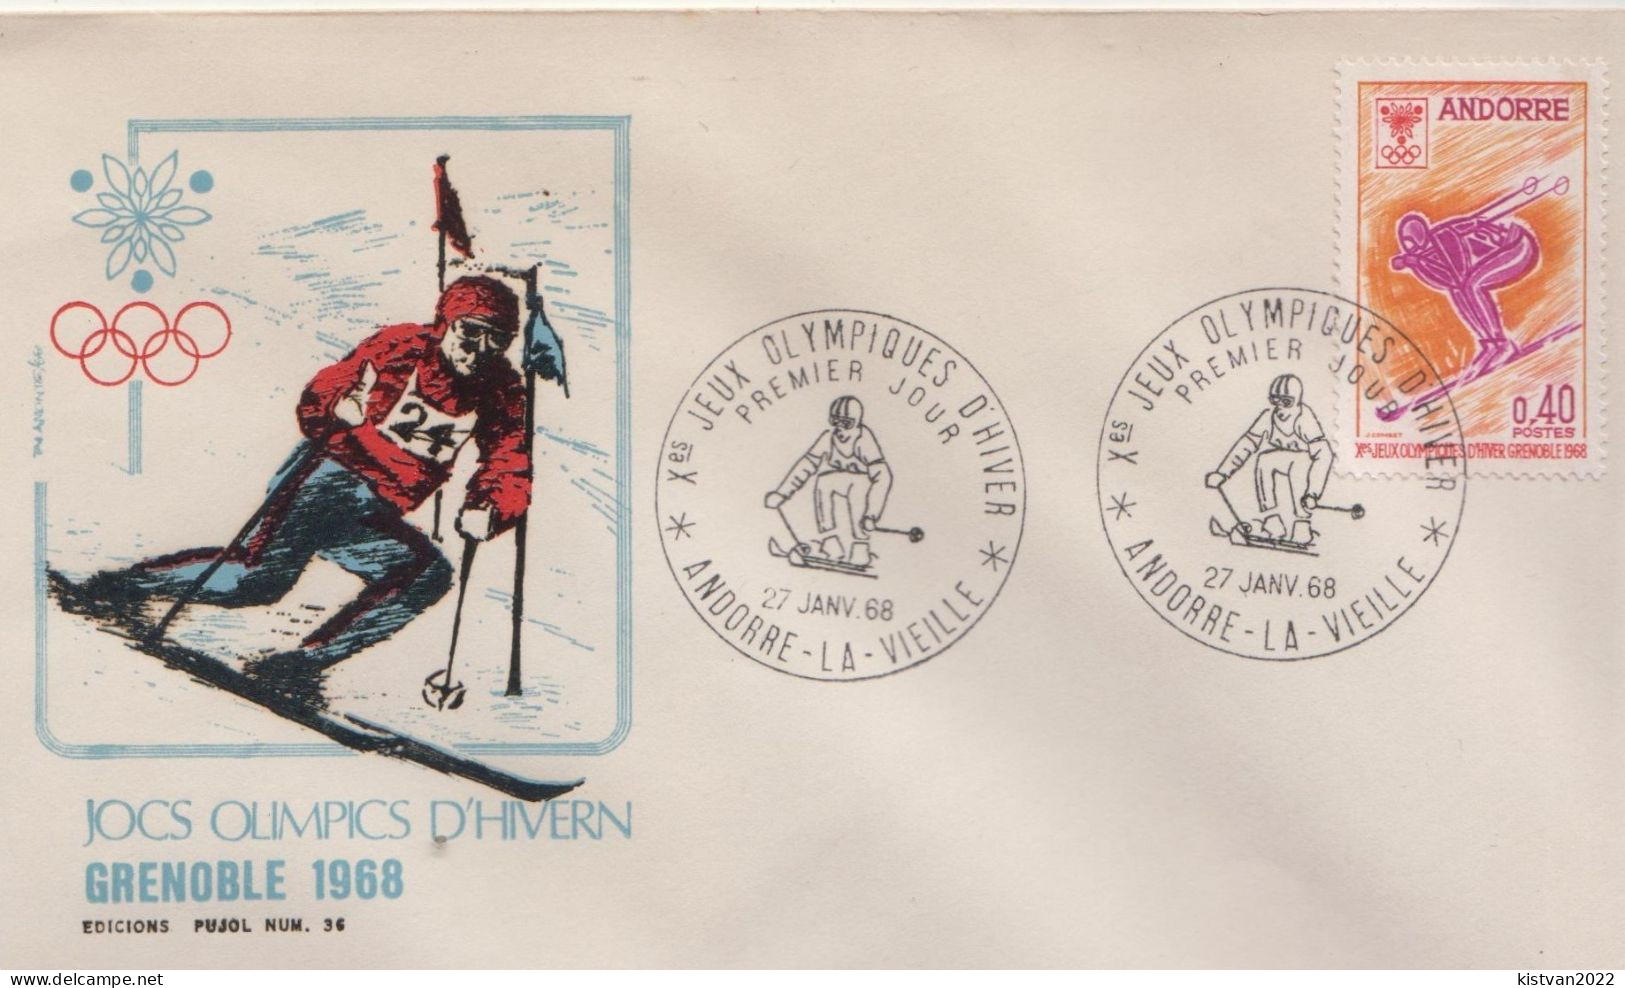 Andorra Stamp On FDC - Winter 1968: Grenoble